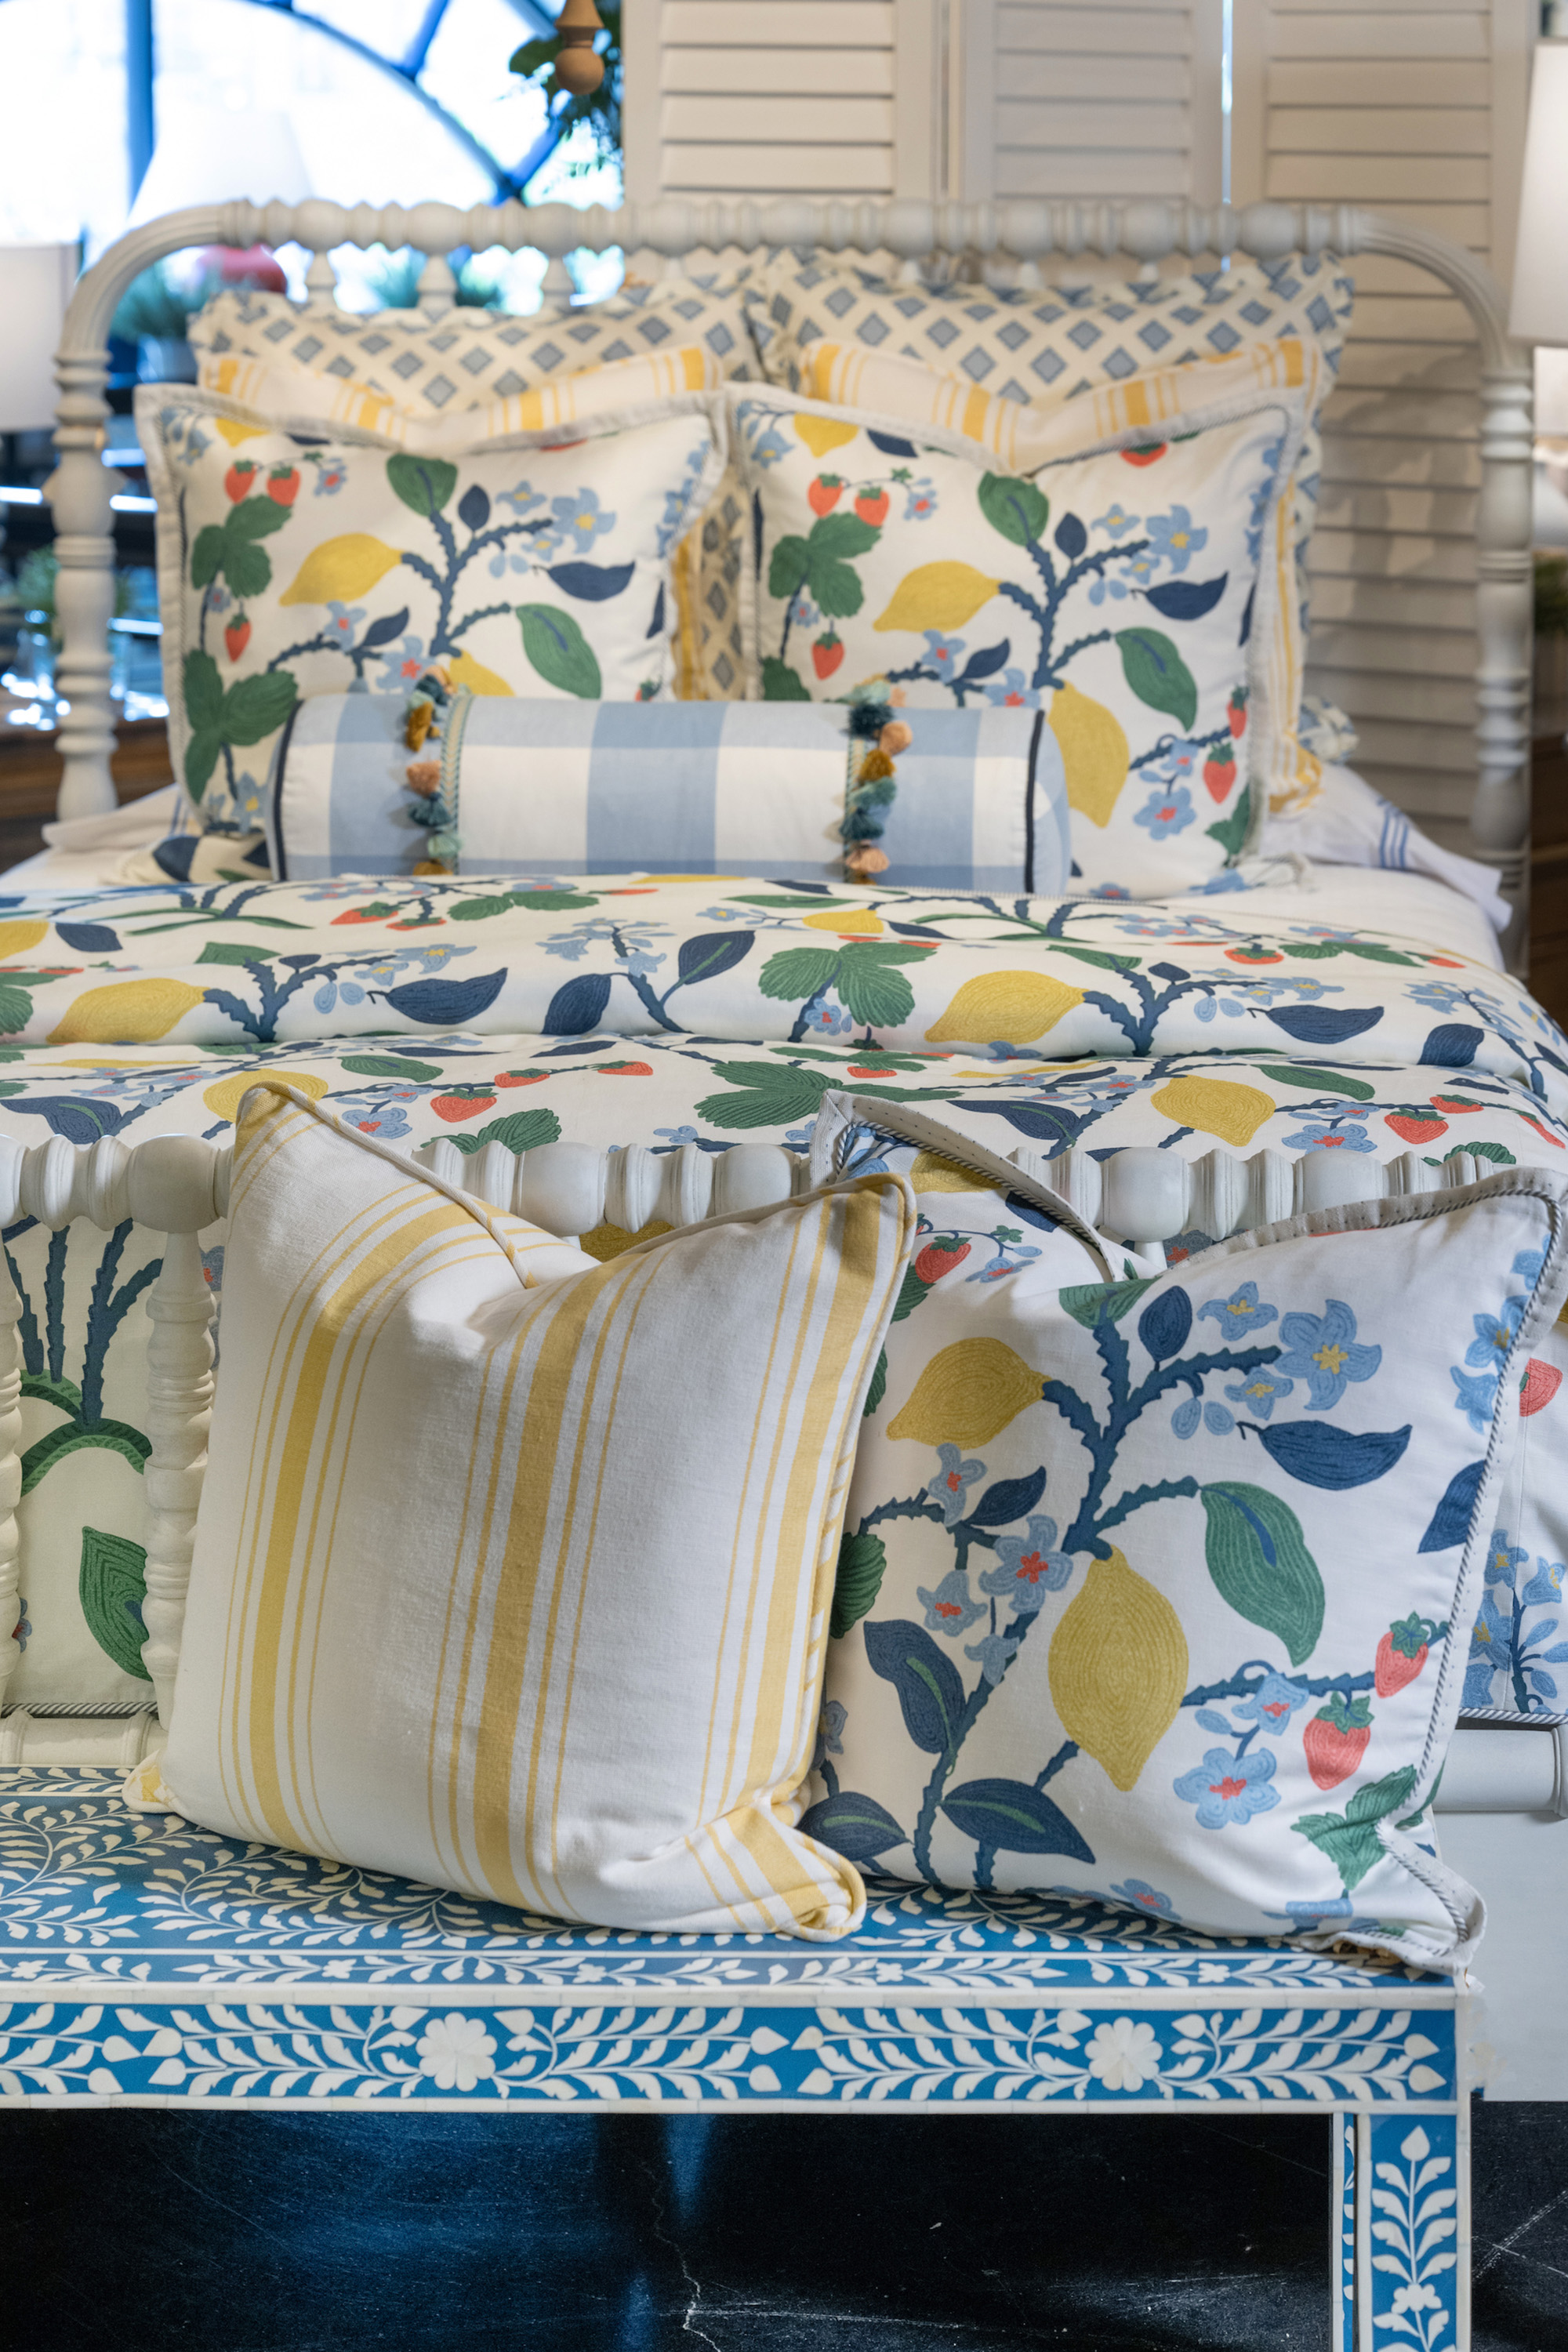 Many pillow trim options working together create an elevated look to this designer bedding set. 